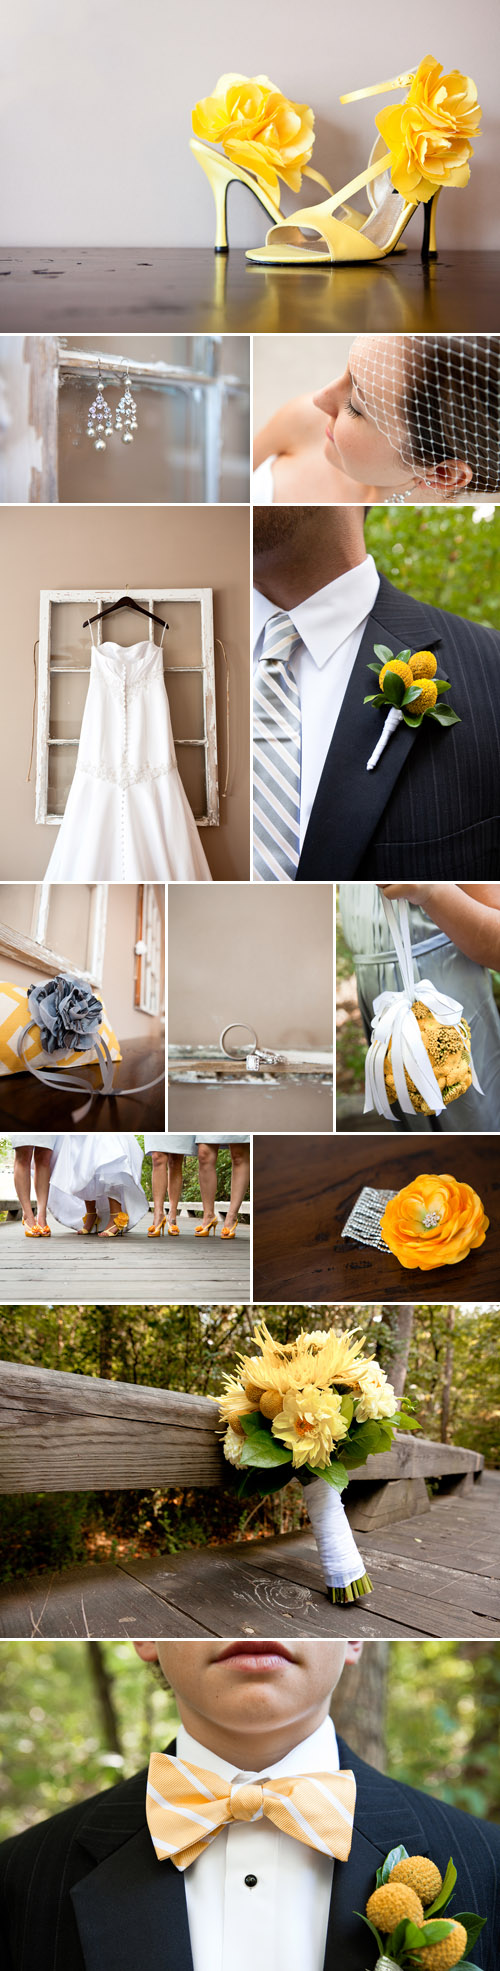 North Carolina wedding with a yellow and gray color palette, photos by Rachel Fesko Photography